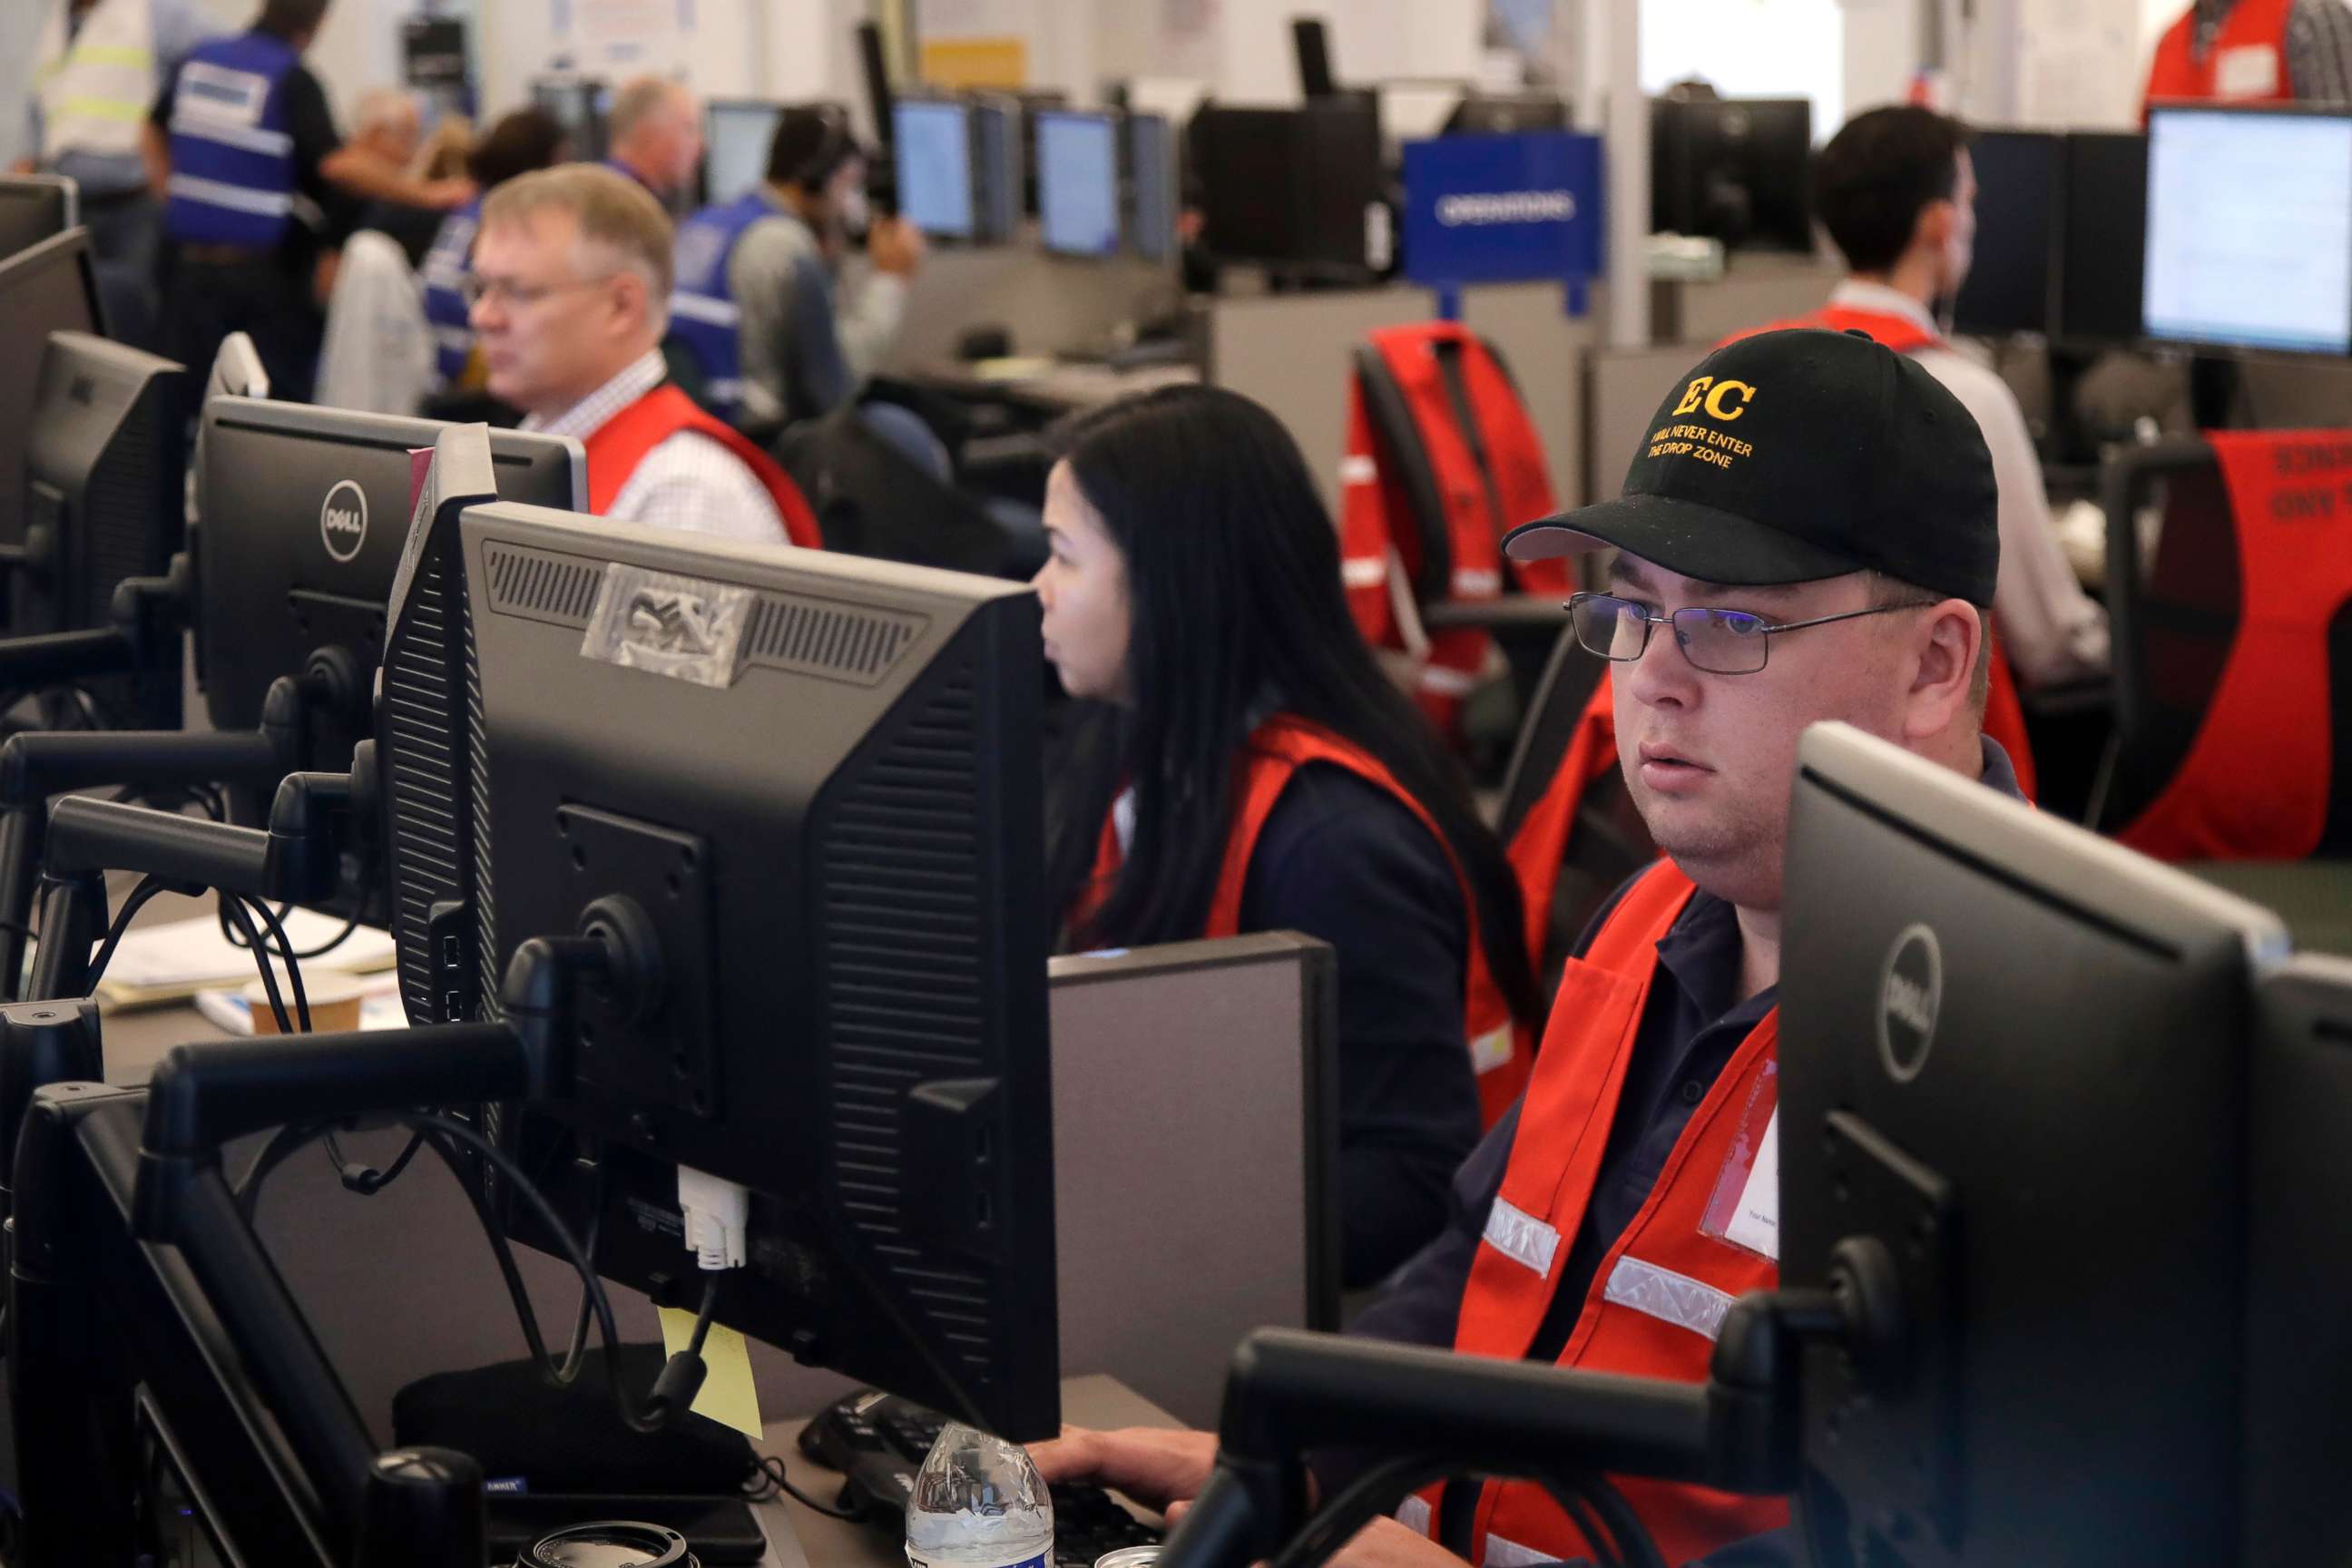 PHOTO: Pacific Gas & Electric employees work in the PG&E Emergency Operations Center in San Francisco, Oct. 10, 2019.